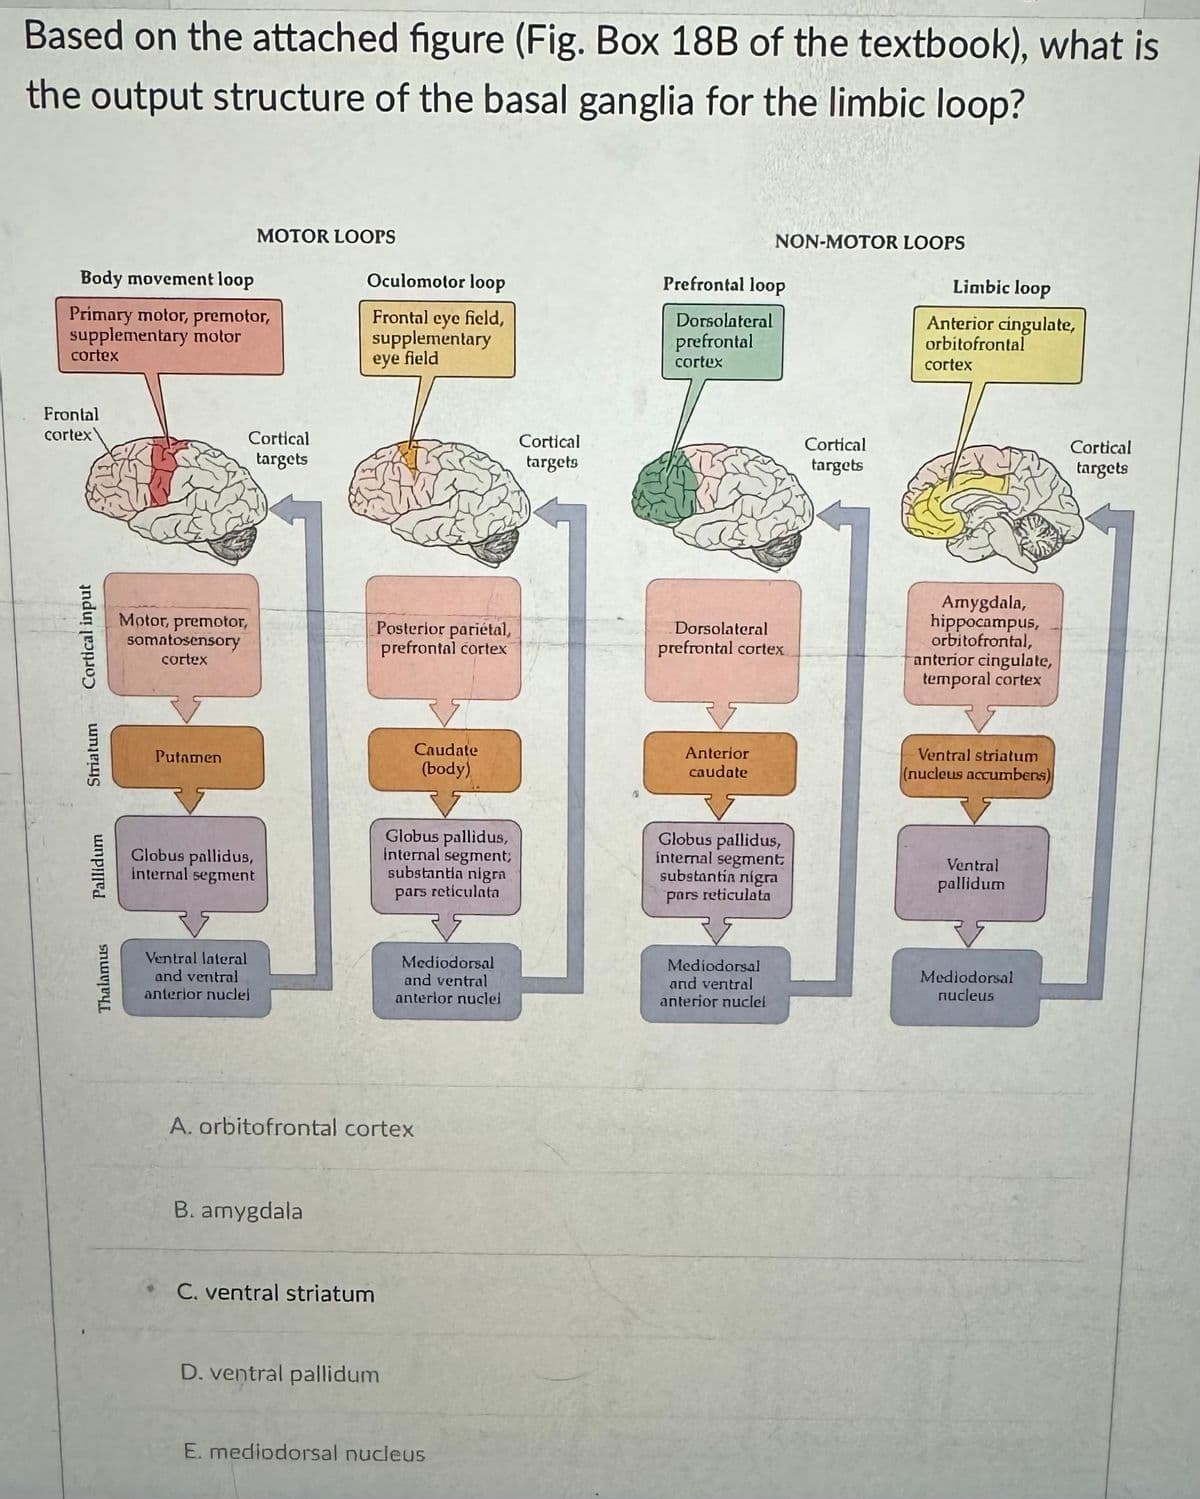 Based on the attached figure (Fig. Box 18B of the textbook), what is
the output structure of the basal ganglia for the limbic loop?
NON-MOTOR LOOPS
Oculomotor loop
Prefrontal loop
Limbic loop
MOTOR LOOPS
Body movement loop
Primary motor, premotor,
supplementary motor
cortex
Frontal eye field,
supplementary
eye field
Frontal
cortex
Cortical input
Thalamus
Pallidum
Striatum
Motor, premotor,
somatosensory
cortex
Putamen
Cortical
targets
Cortical
targets
Dorsolateral
prefrontal
cortex
Posterior pariétal,
prefrontal cortex
Dorsolateral
prefrontal cortex
Caudate
(body)
Anterior
caudate
Cortical
targets
Anterior cingulate,
orbitofrontal
cortex
Amygdala,
hippocampus,
orbitofrontal,
anterior cingulate,
temporal cortex
Ventral striatum
(nucleus accumbens)
Ventral
HA
Globus pallidus,
internal segment
Globus pallidus,
Internal segment;
substantia nigra
pars reticulata
Globus pallidus,
internal segment
substantia nigra
pars reticulata
pallidum
Ventral lateral
and ventral
anterior nuclei
Mediodorsal
and ventral
anterior nuclei
Mediodorsal
and ventral
anterior nuclei
A. orbitofrontal cortex
B. amygdala
C. ventral striatum
D. ventral pallidum
E. mediodorsal nucleus
Mediodorsal
nucleus
Cortical
targets